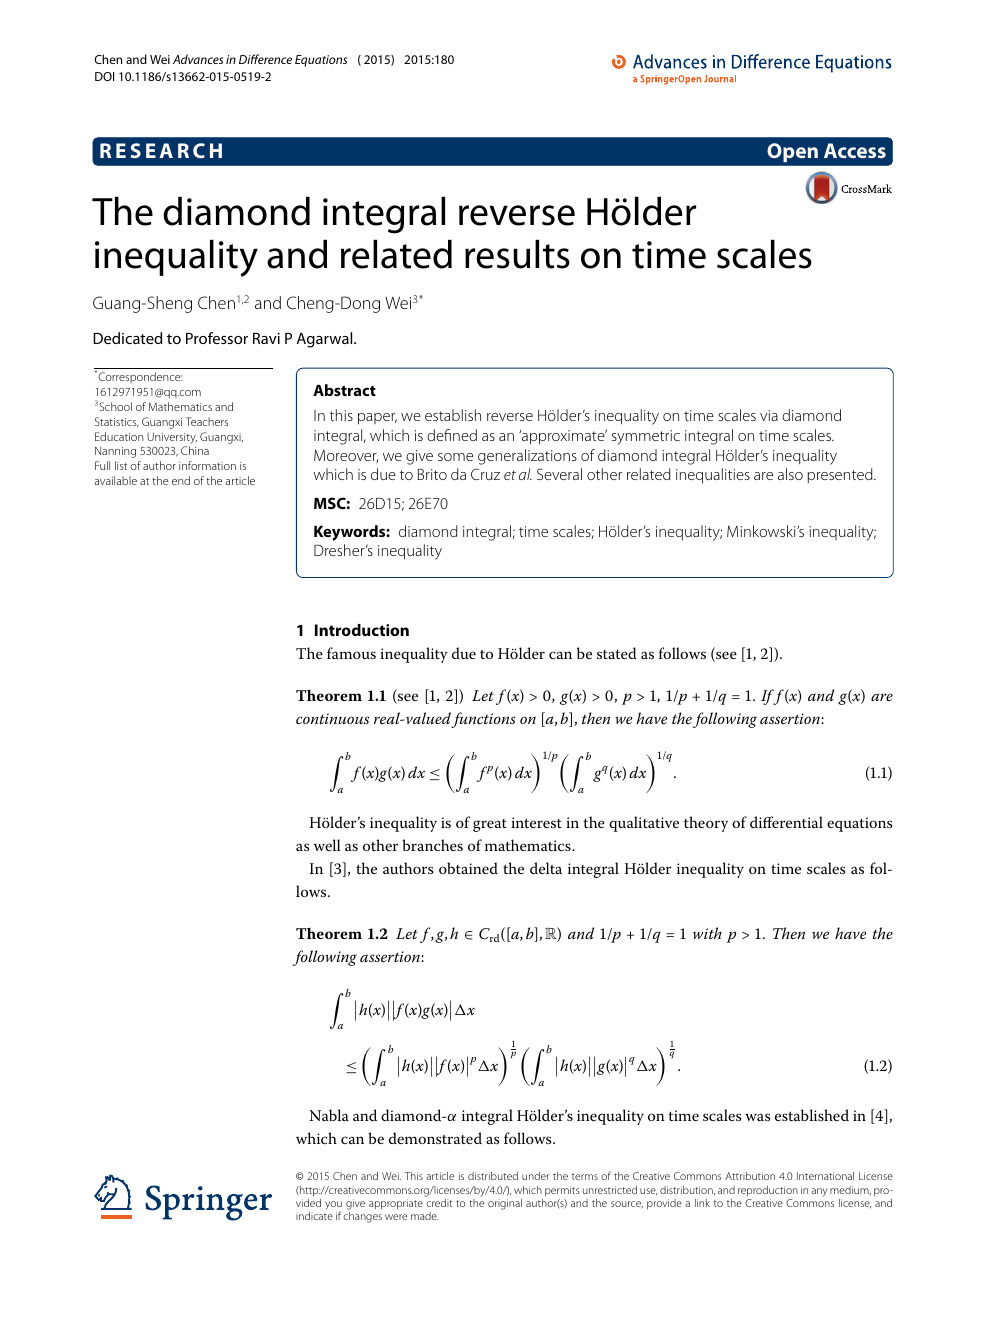 The Diamond Integral Reverse Holder Inequality And Related Results On Time Scales Topic Of Research Paper In Mathematics Download Scholarly Article Pdf And Read For Free On Cyberleninka Open Science Hub